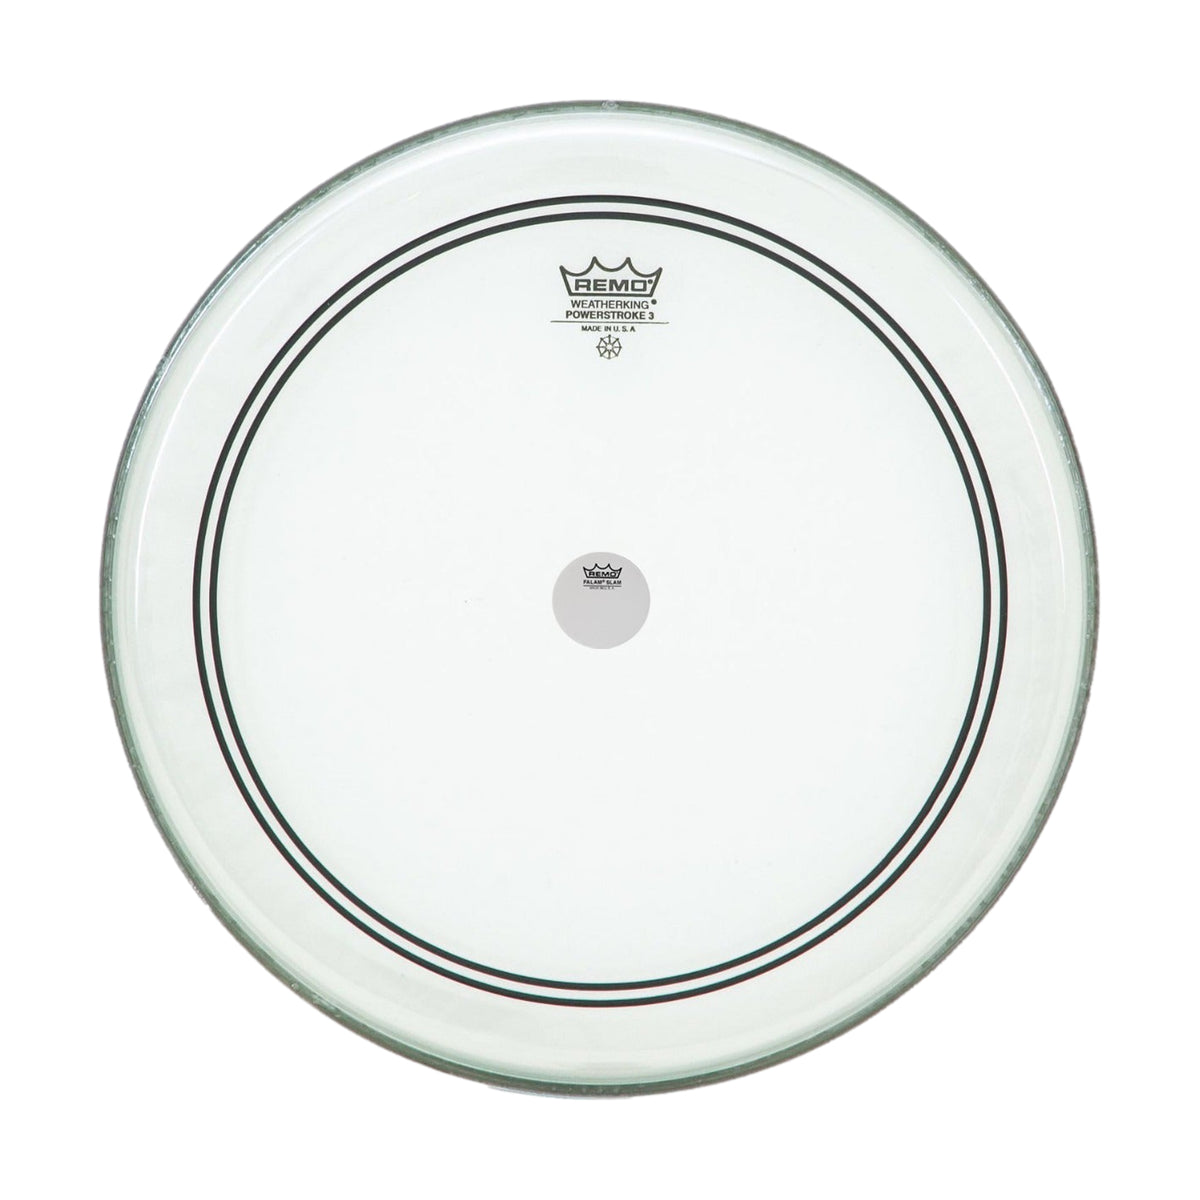 Remo Powerstroke 3 Clear 20 Inch Bass Drum Head